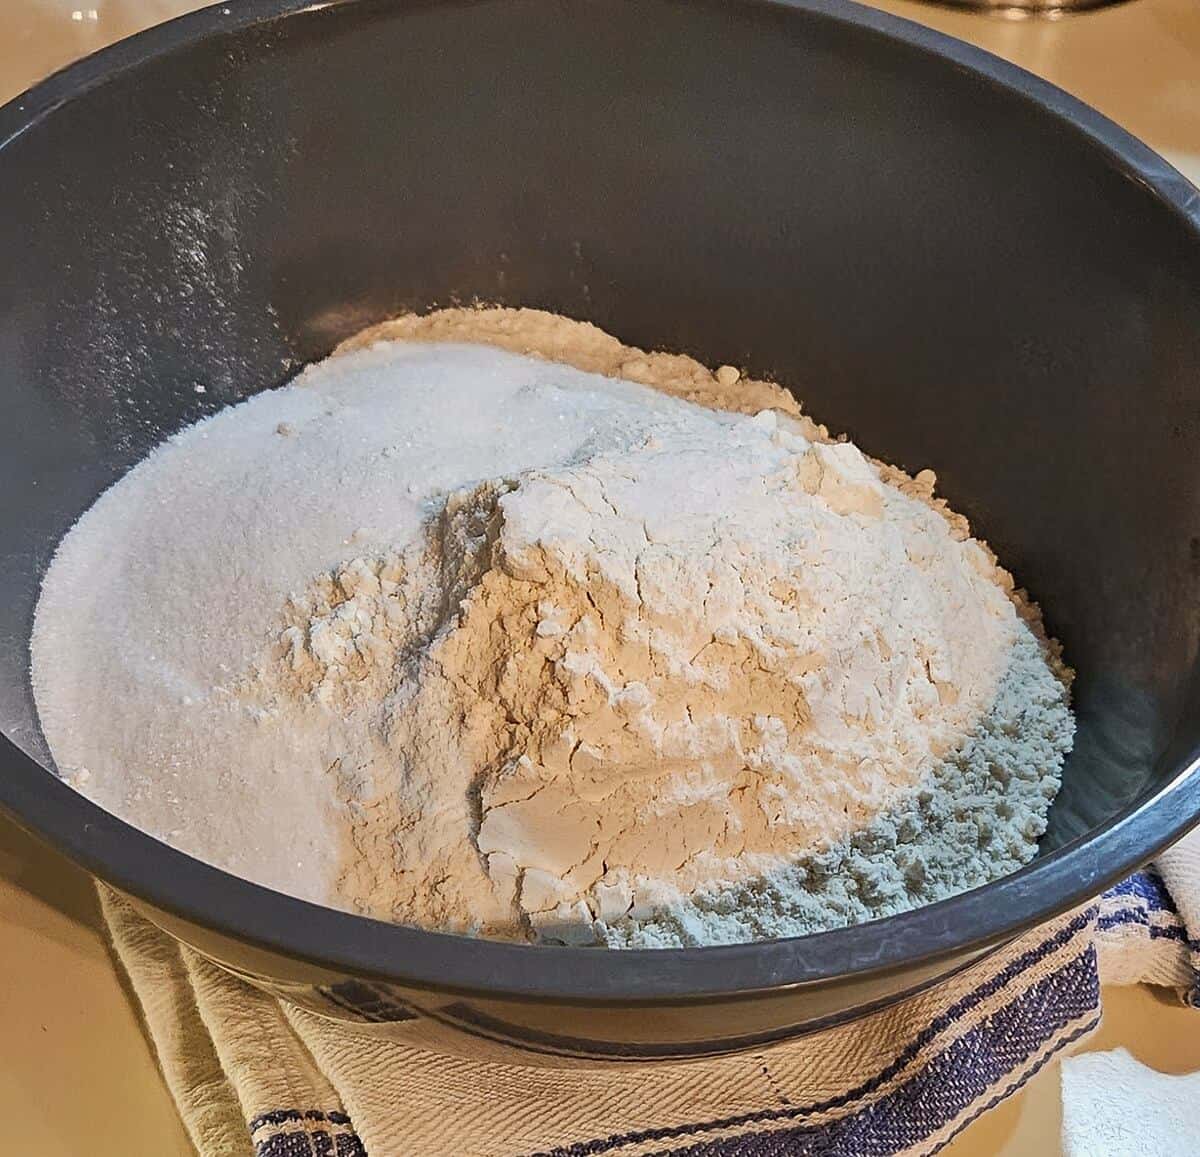 dry ingredients for pie crust in bowl